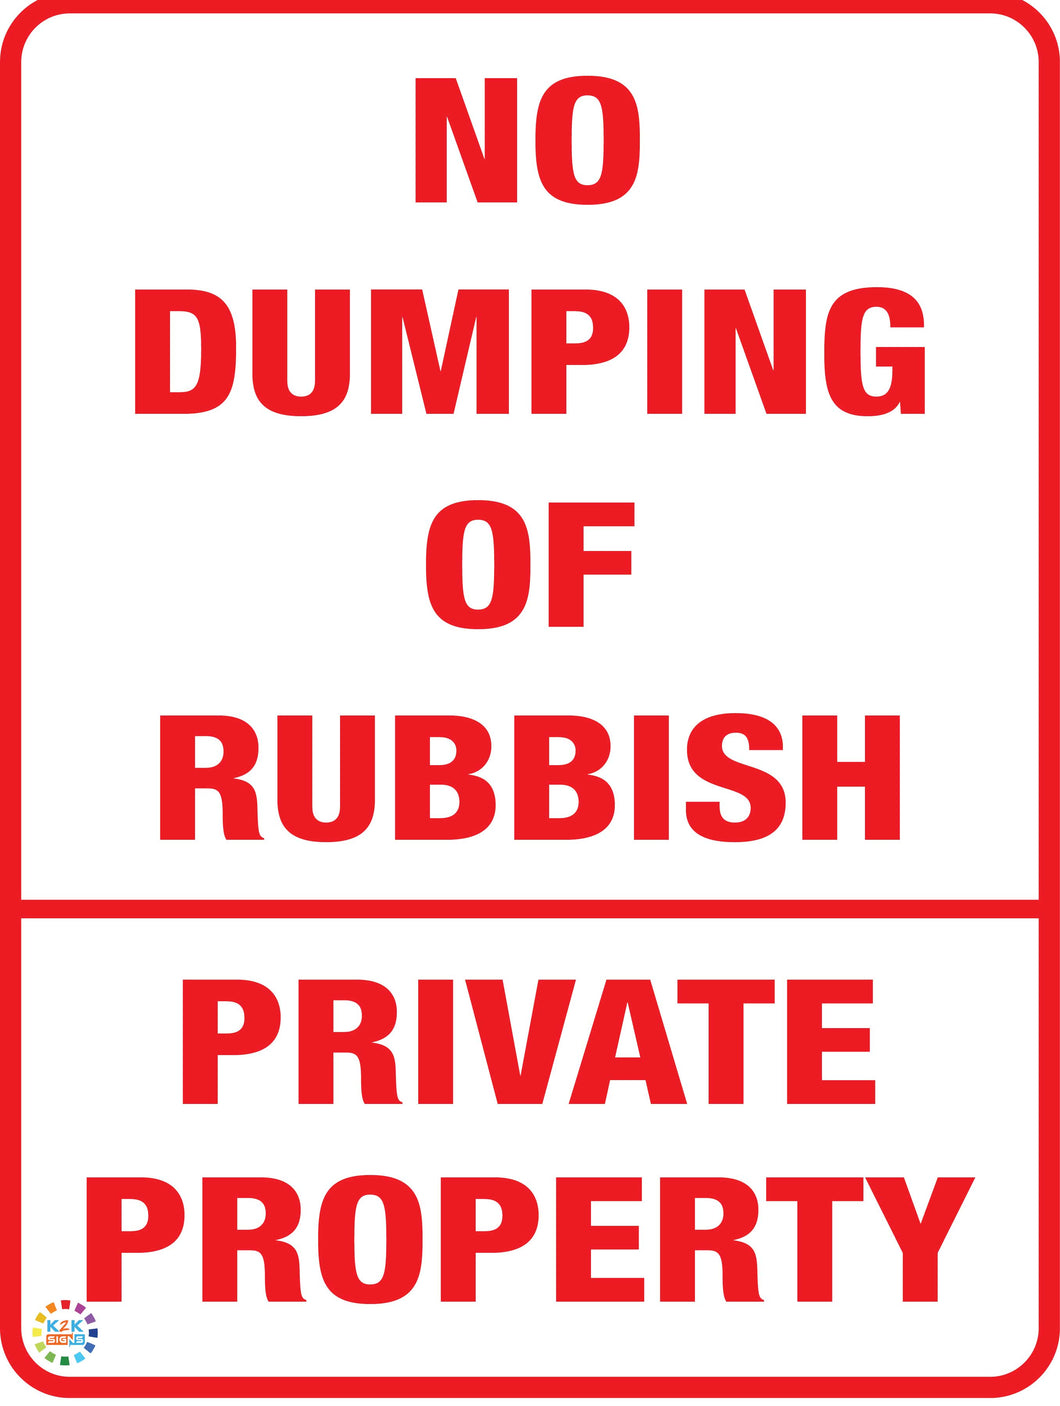 No Dumping of Rubbish - Private Property Sign